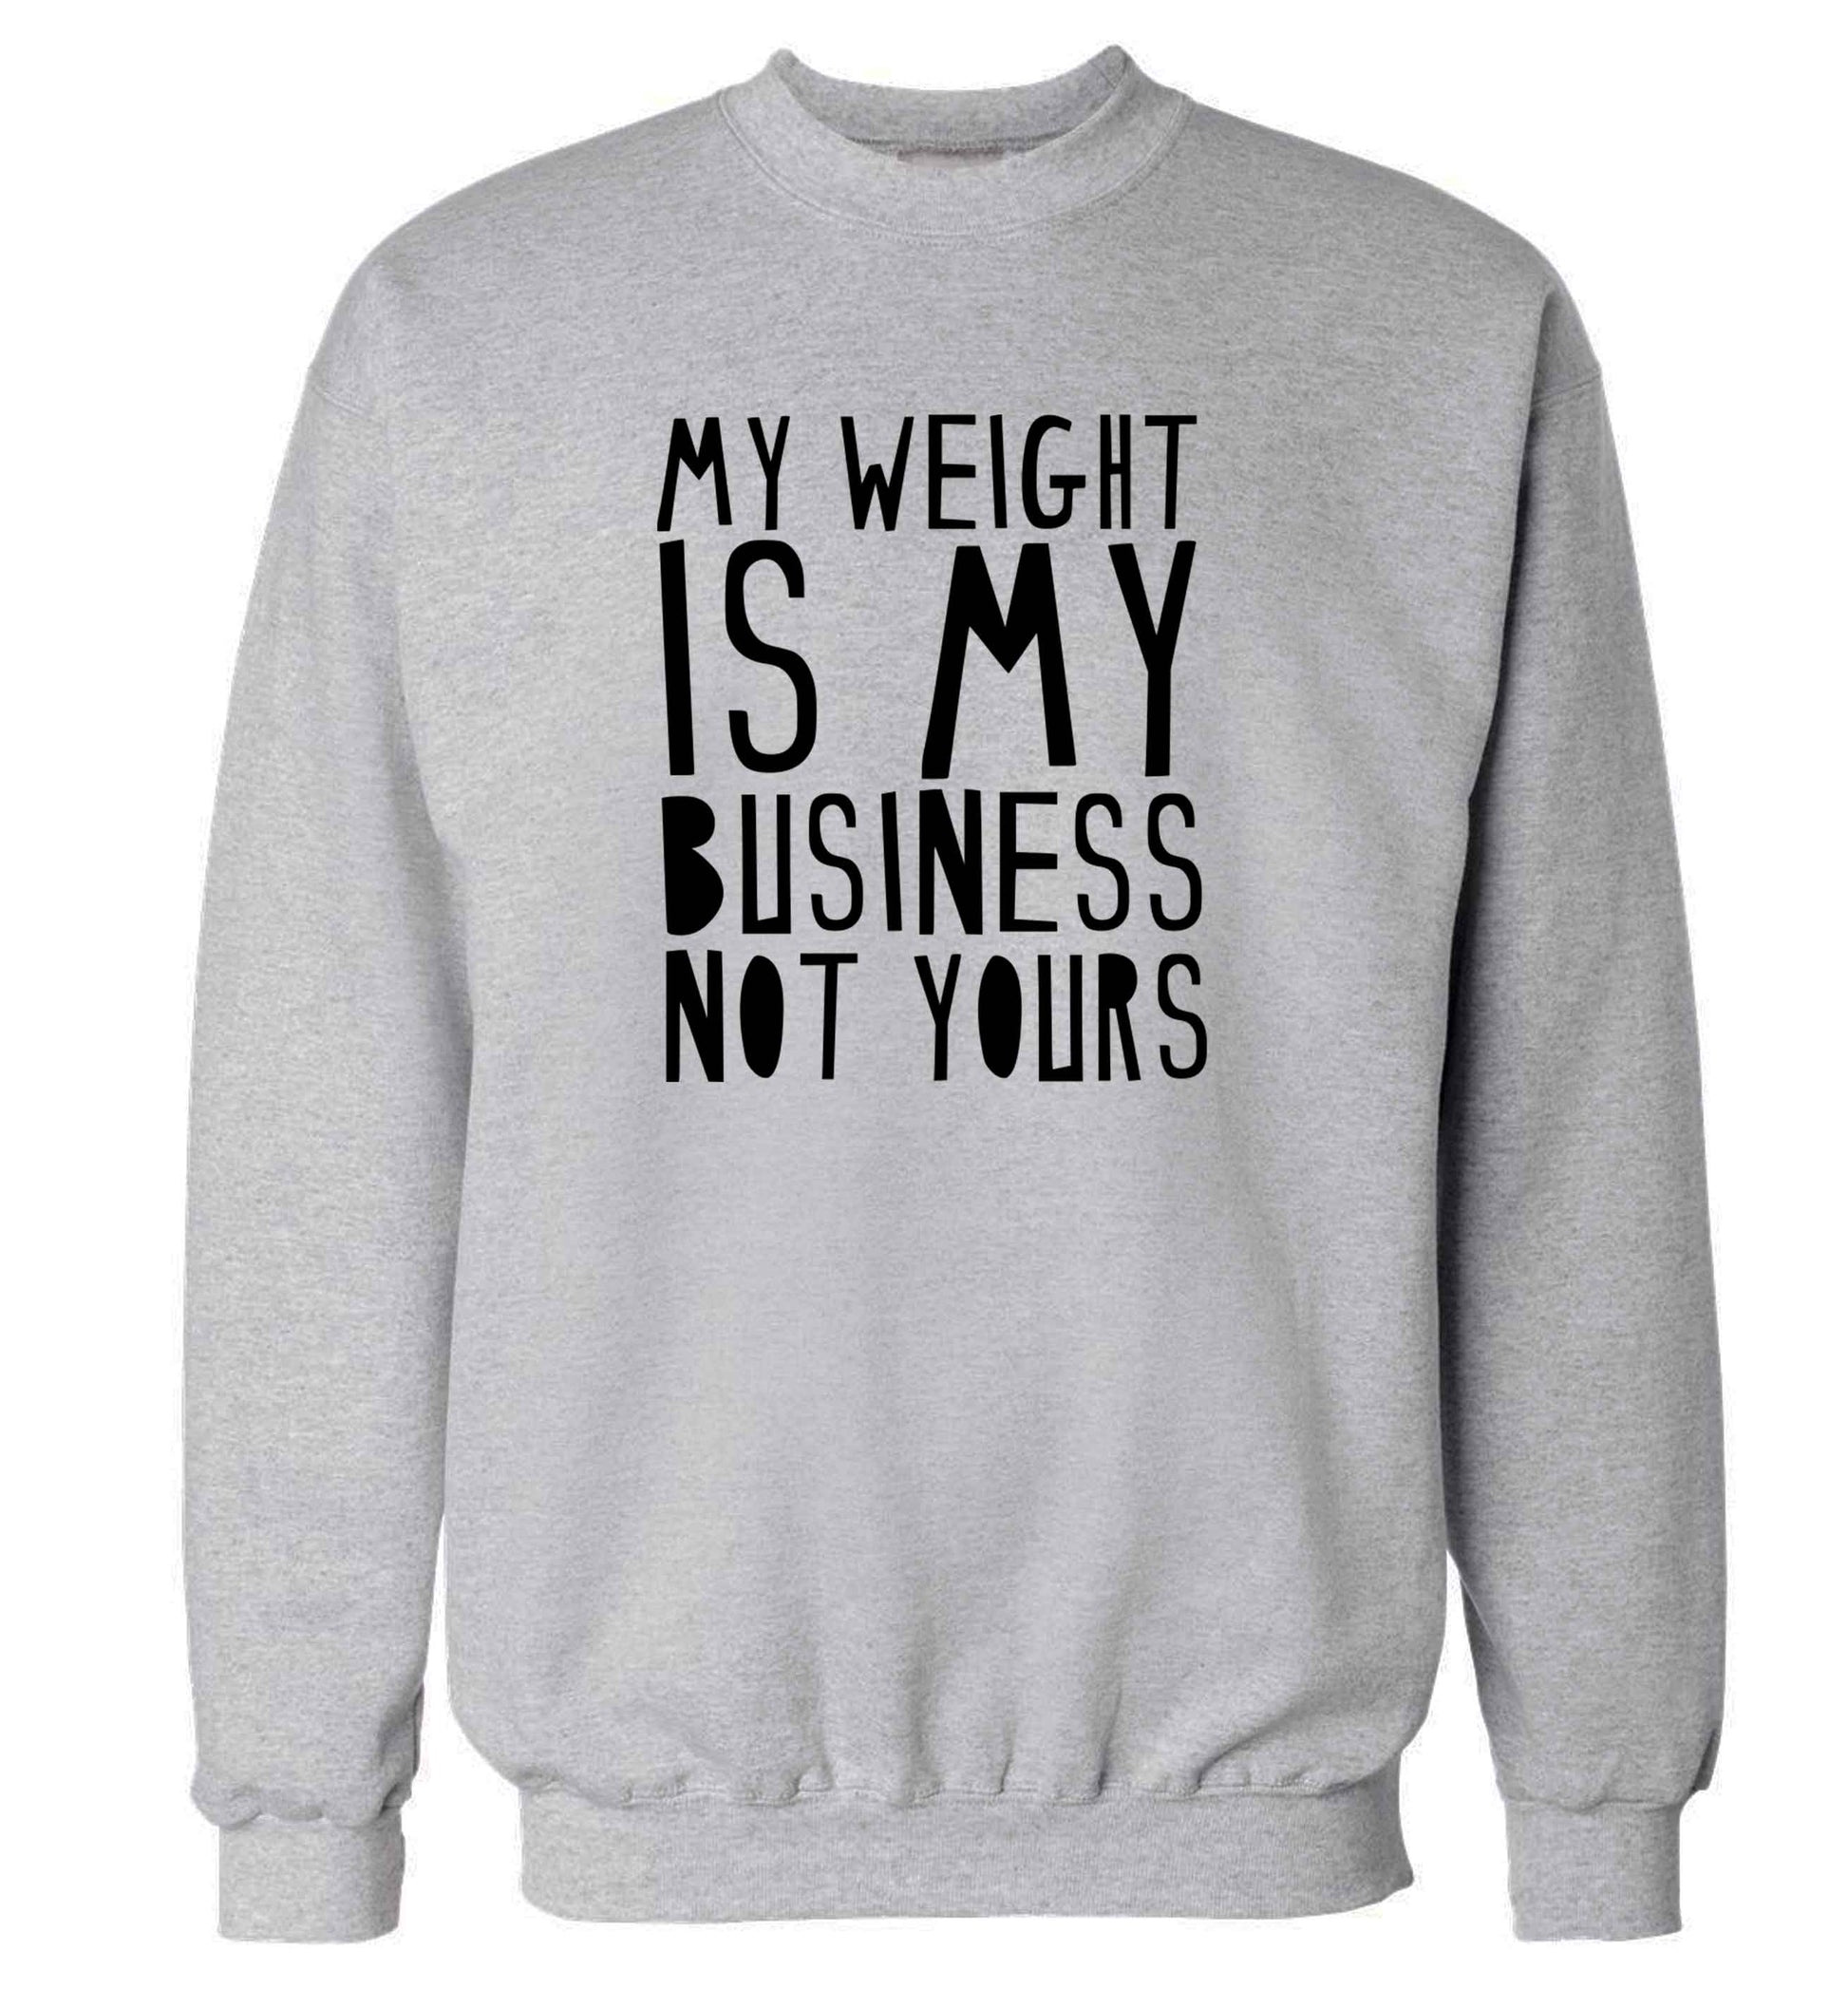 My weight is my business not yours adult's unisex grey sweater 2XL